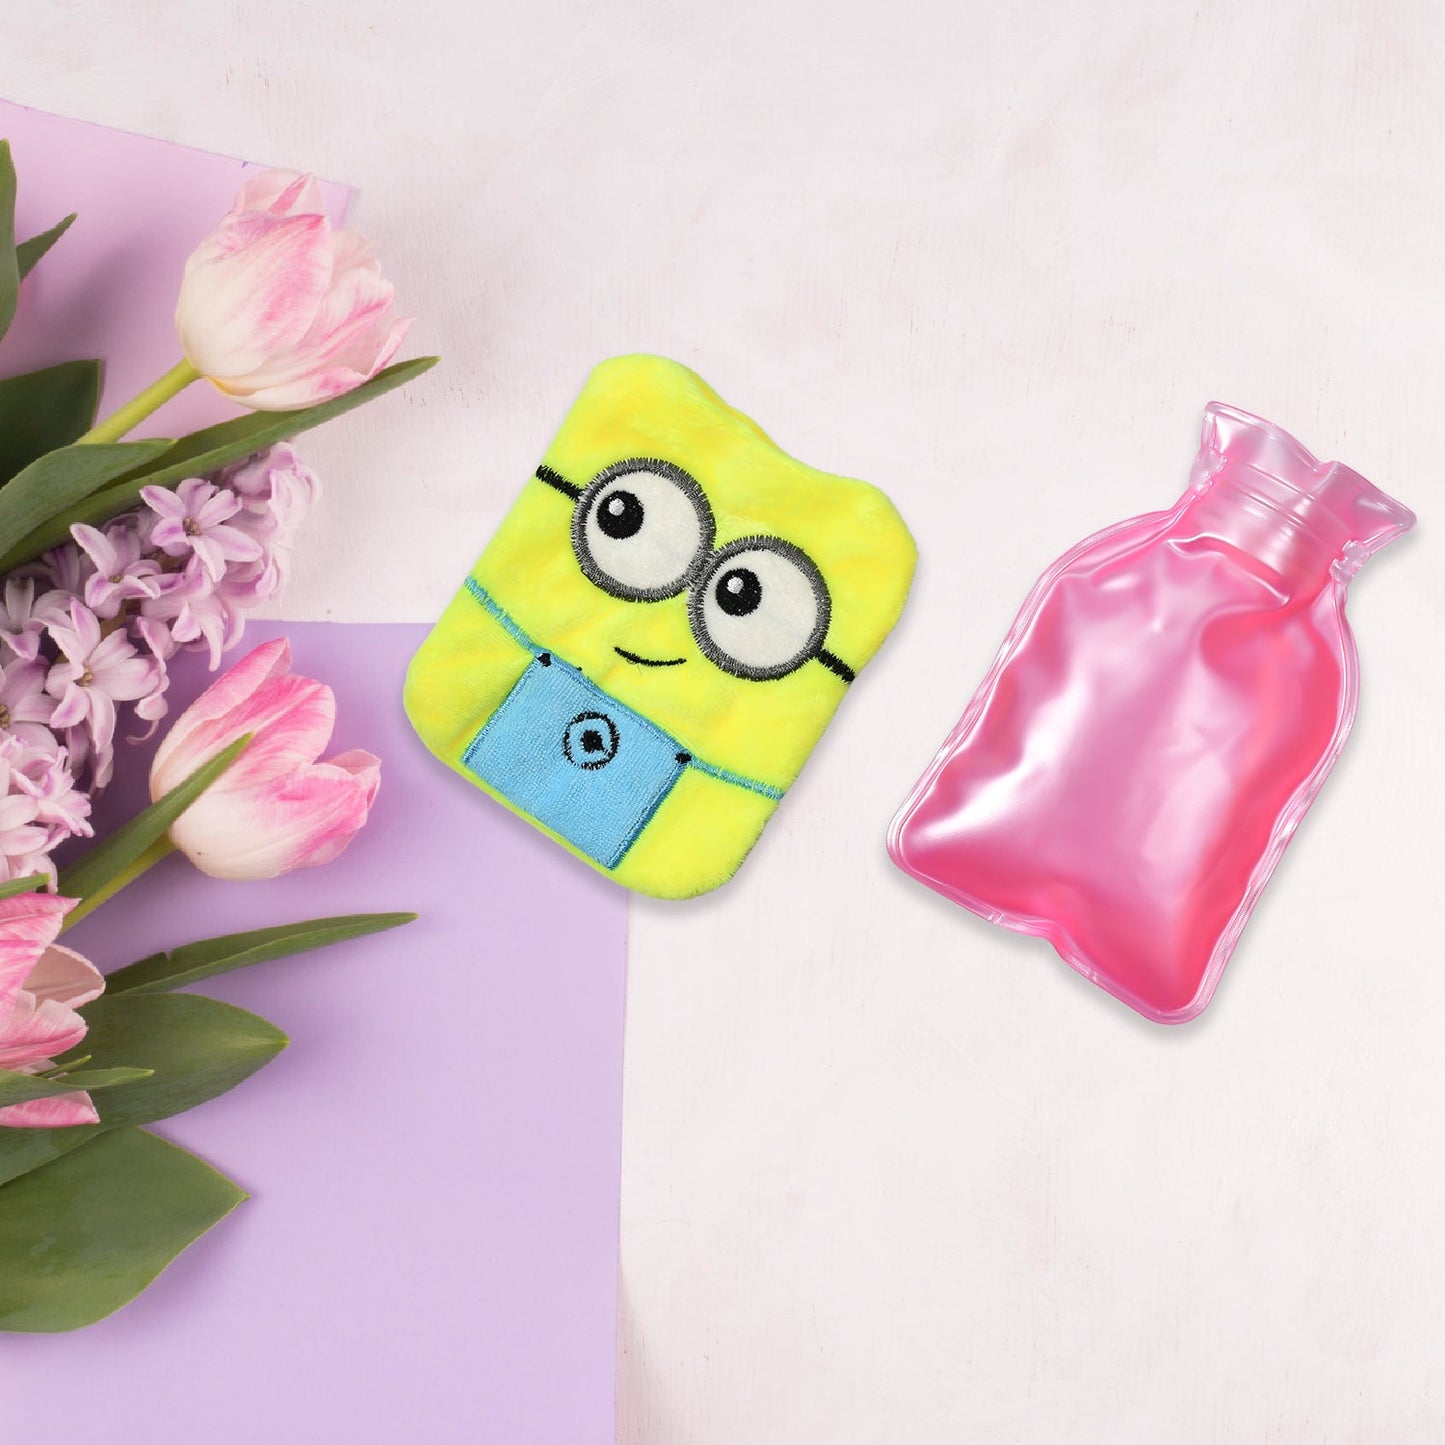 6507 2Eye Minions small Hot Water Bag with Cover for Pain Relief, Neck, Shoulder Pain and Hand, Feet Warmer, Menstrual Cramps. 